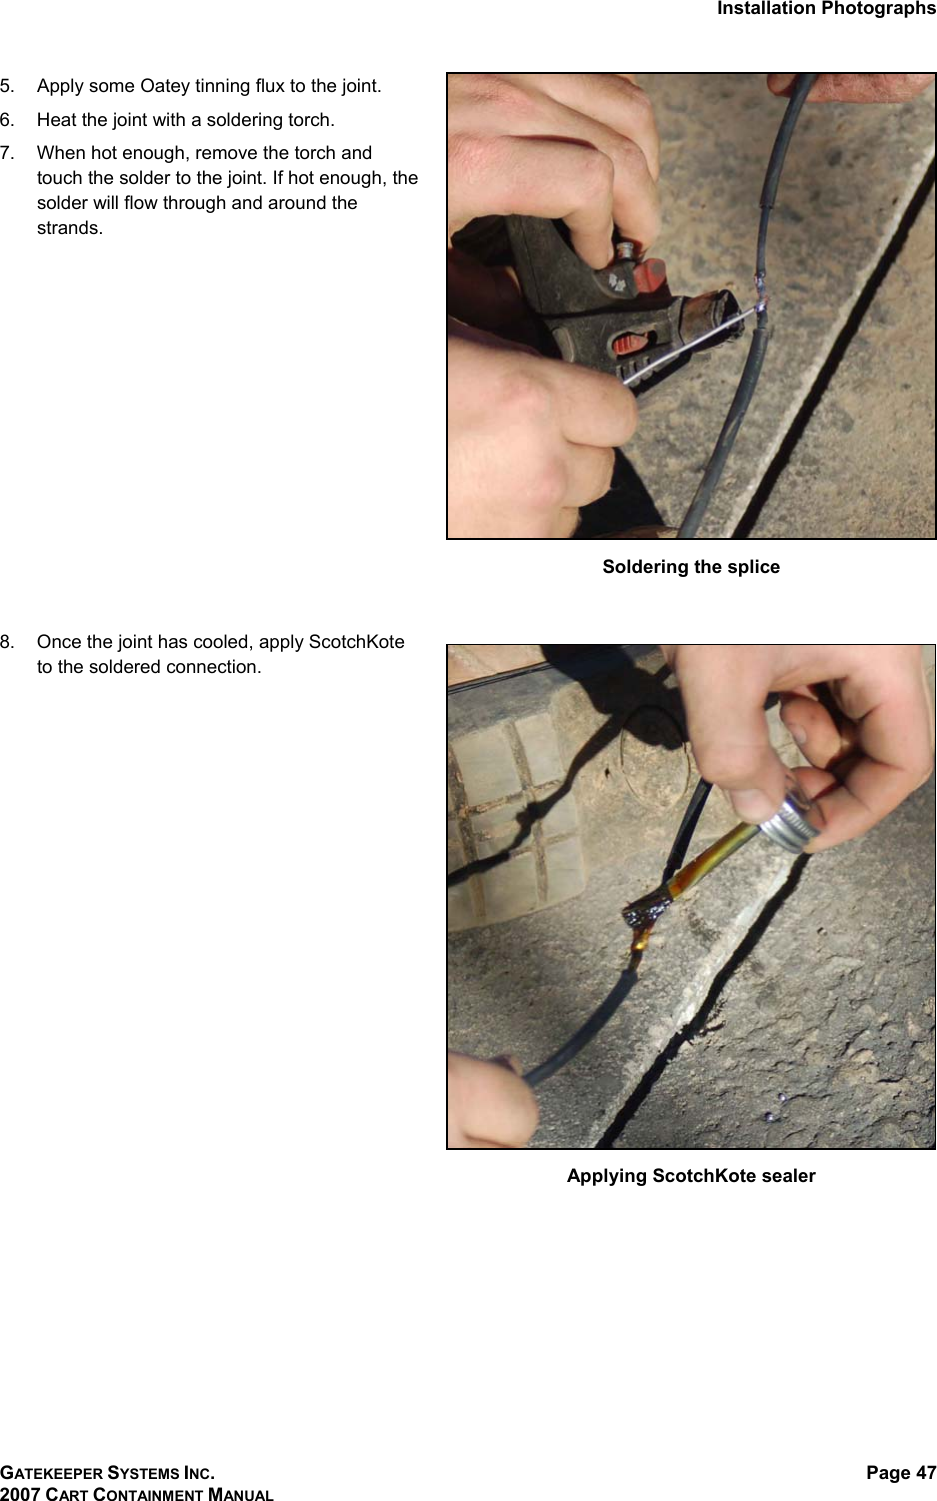 Installation Photographs GATEKEEPER SYSTEMS INC. 2007 CART CONTAINMENT MANUAL Page 47  5.  Apply some Oatey tinning flux to the joint. 6.  Heat the joint with a soldering torch.  7.  When hot enough, remove the torch and touch the solder to the joint. If hot enough, the solder will flow through and around the strands.    Soldering the splice  8.  Once the joint has cooled, apply ScotchKote to the soldered connection.    Applying ScotchKote sealer  